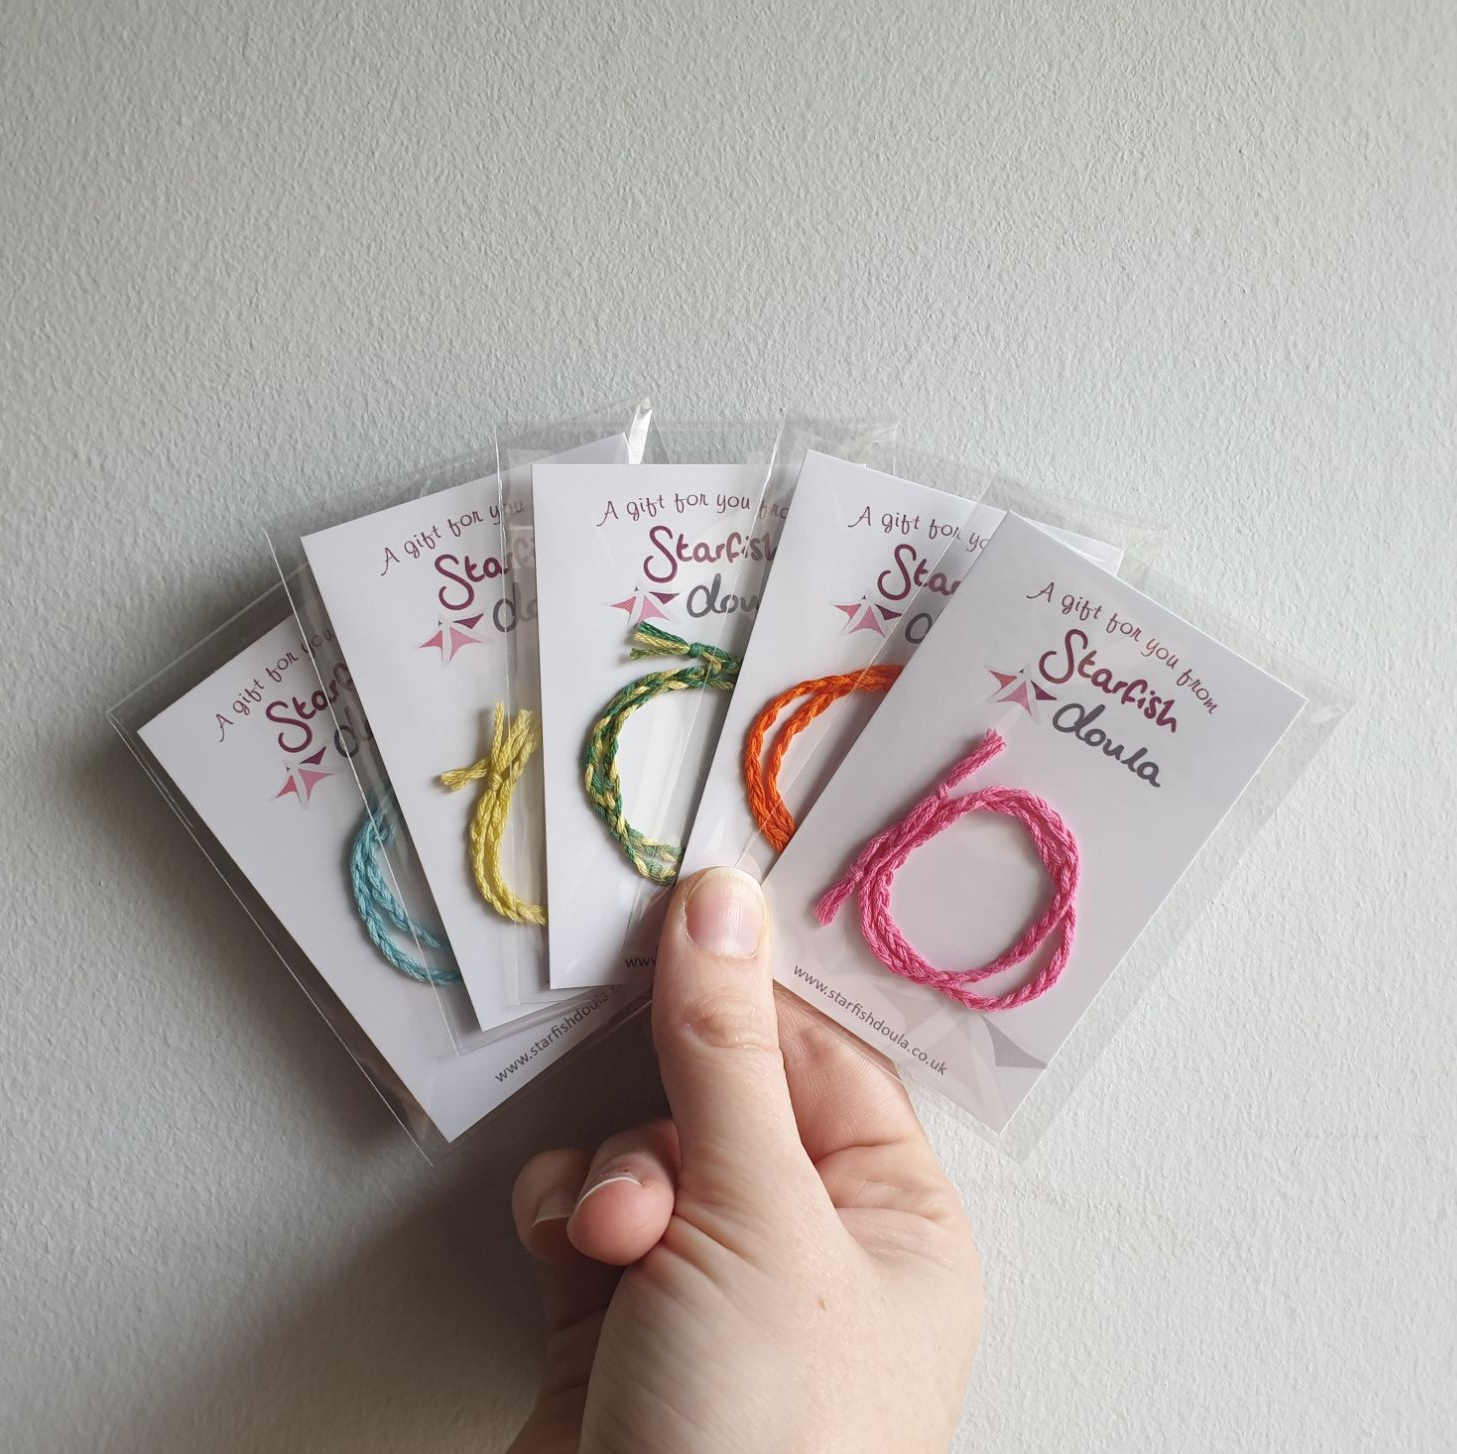 5 differently coloured cord ties in packets.